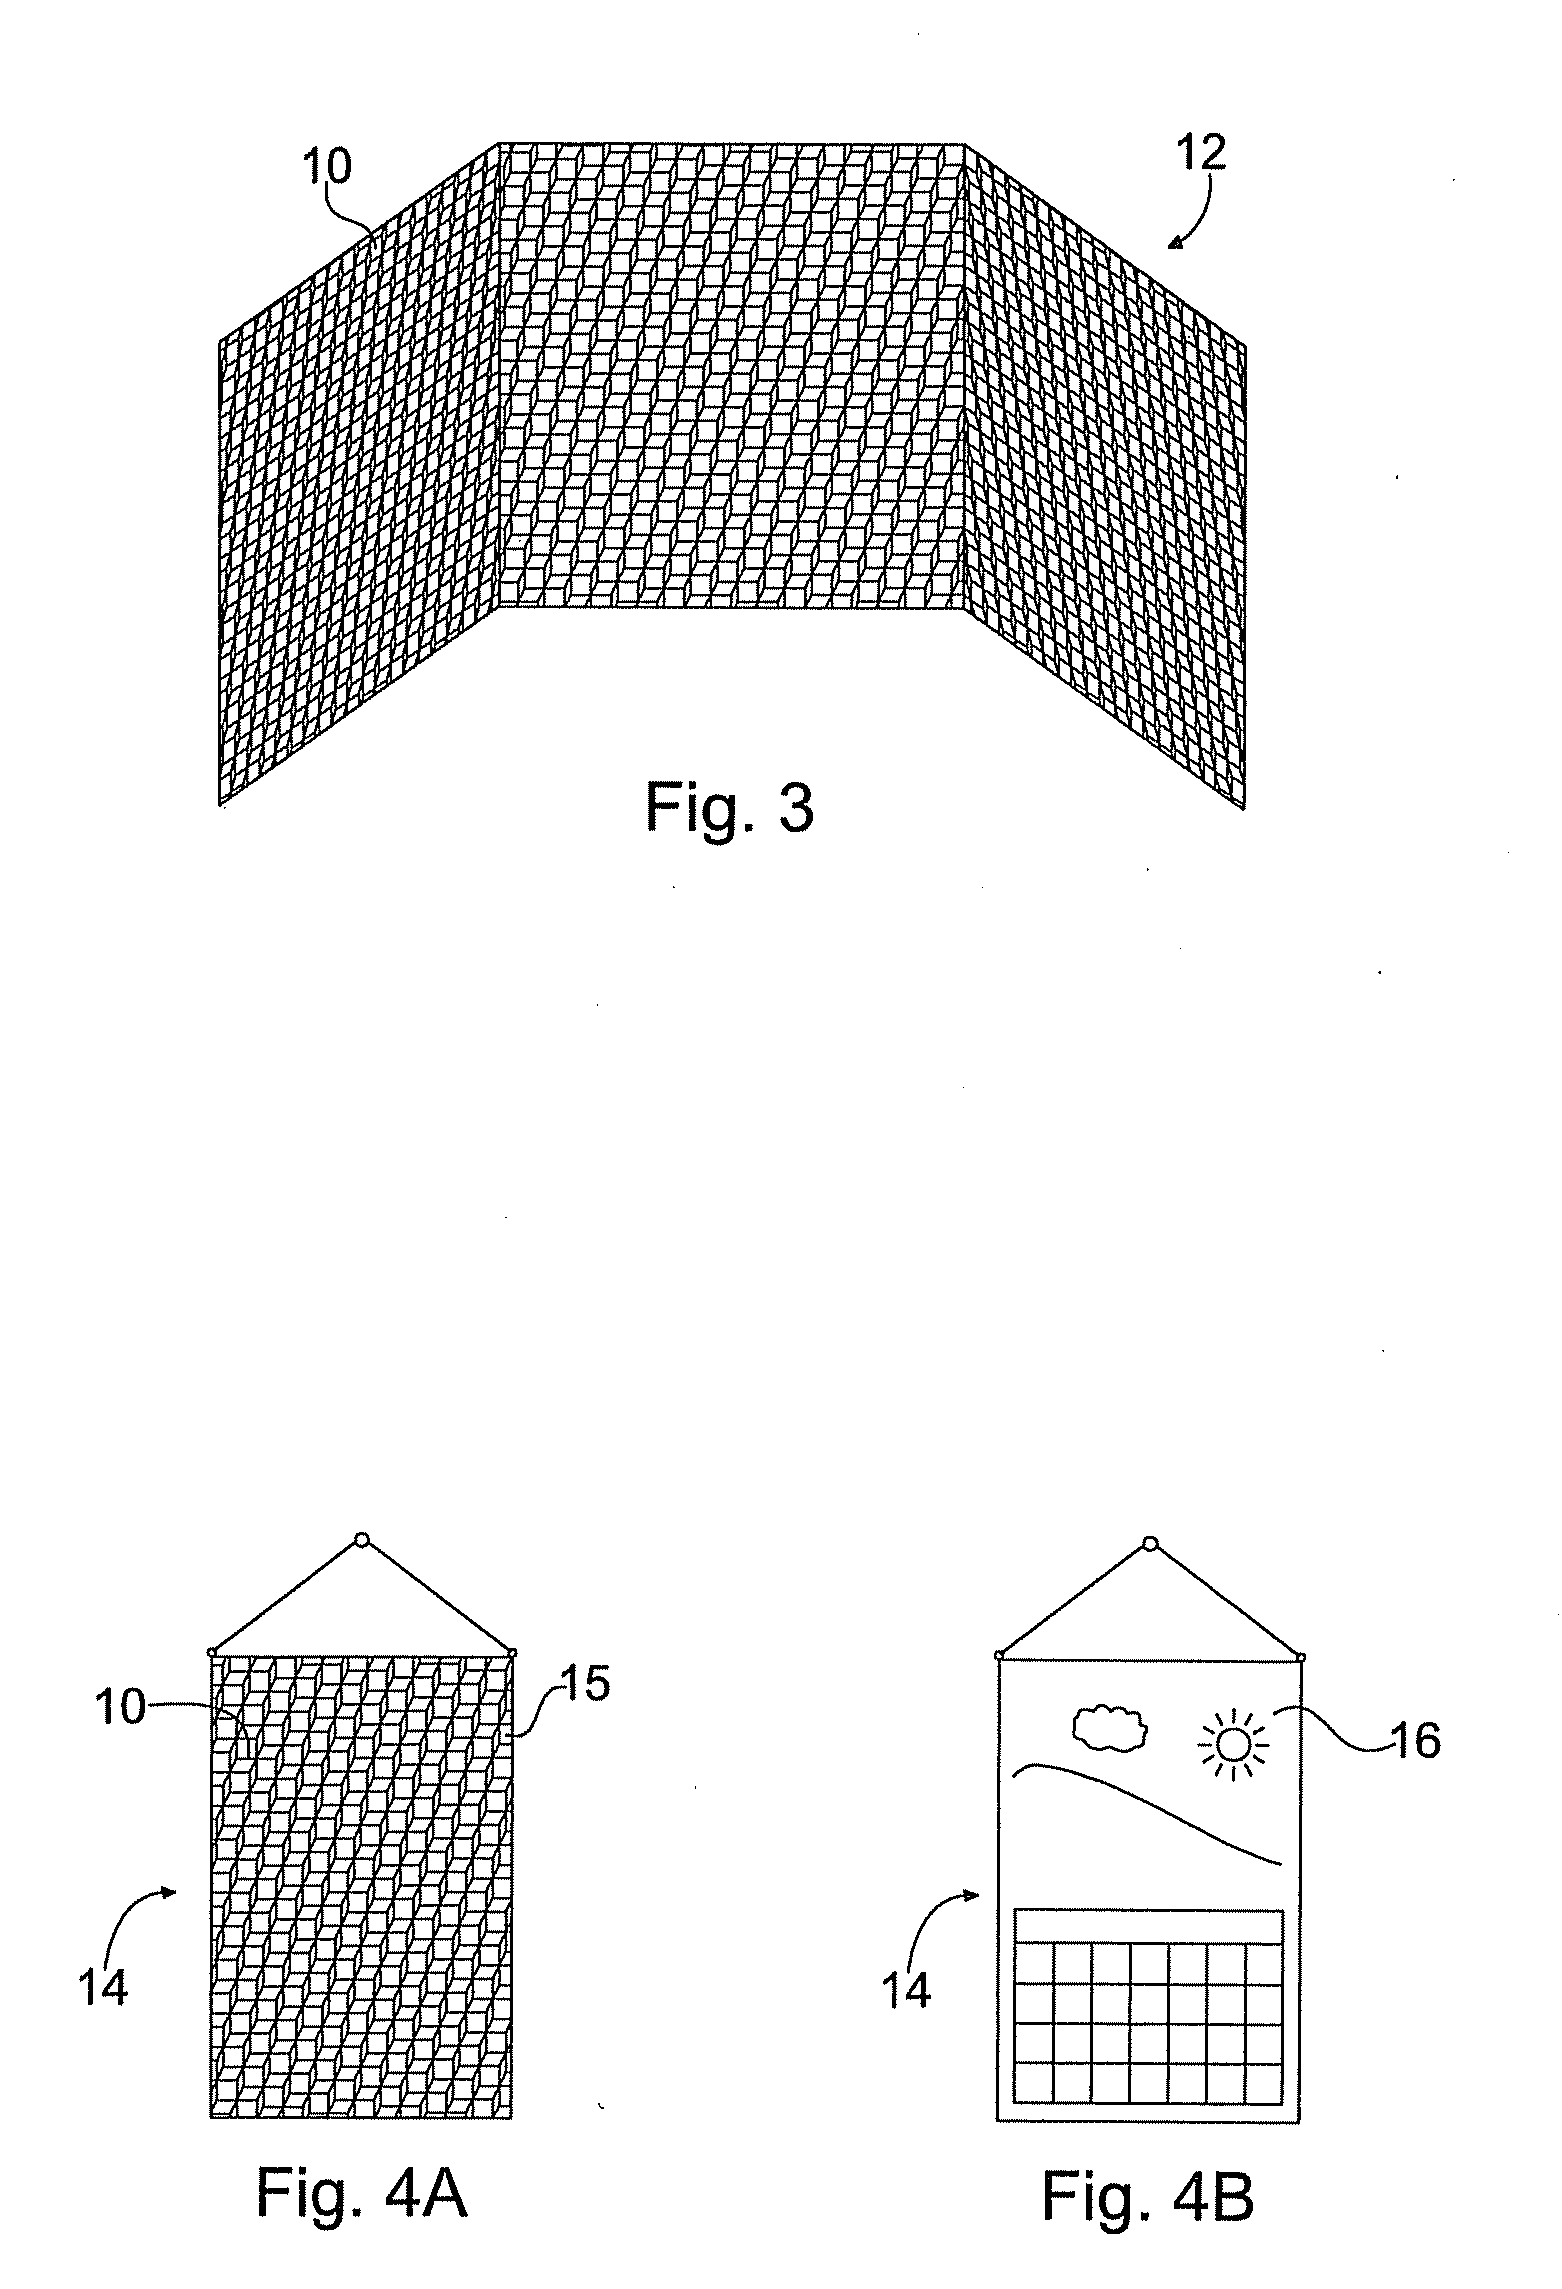 System and Method for Heat Energy Conservation Via Corner Reflectors